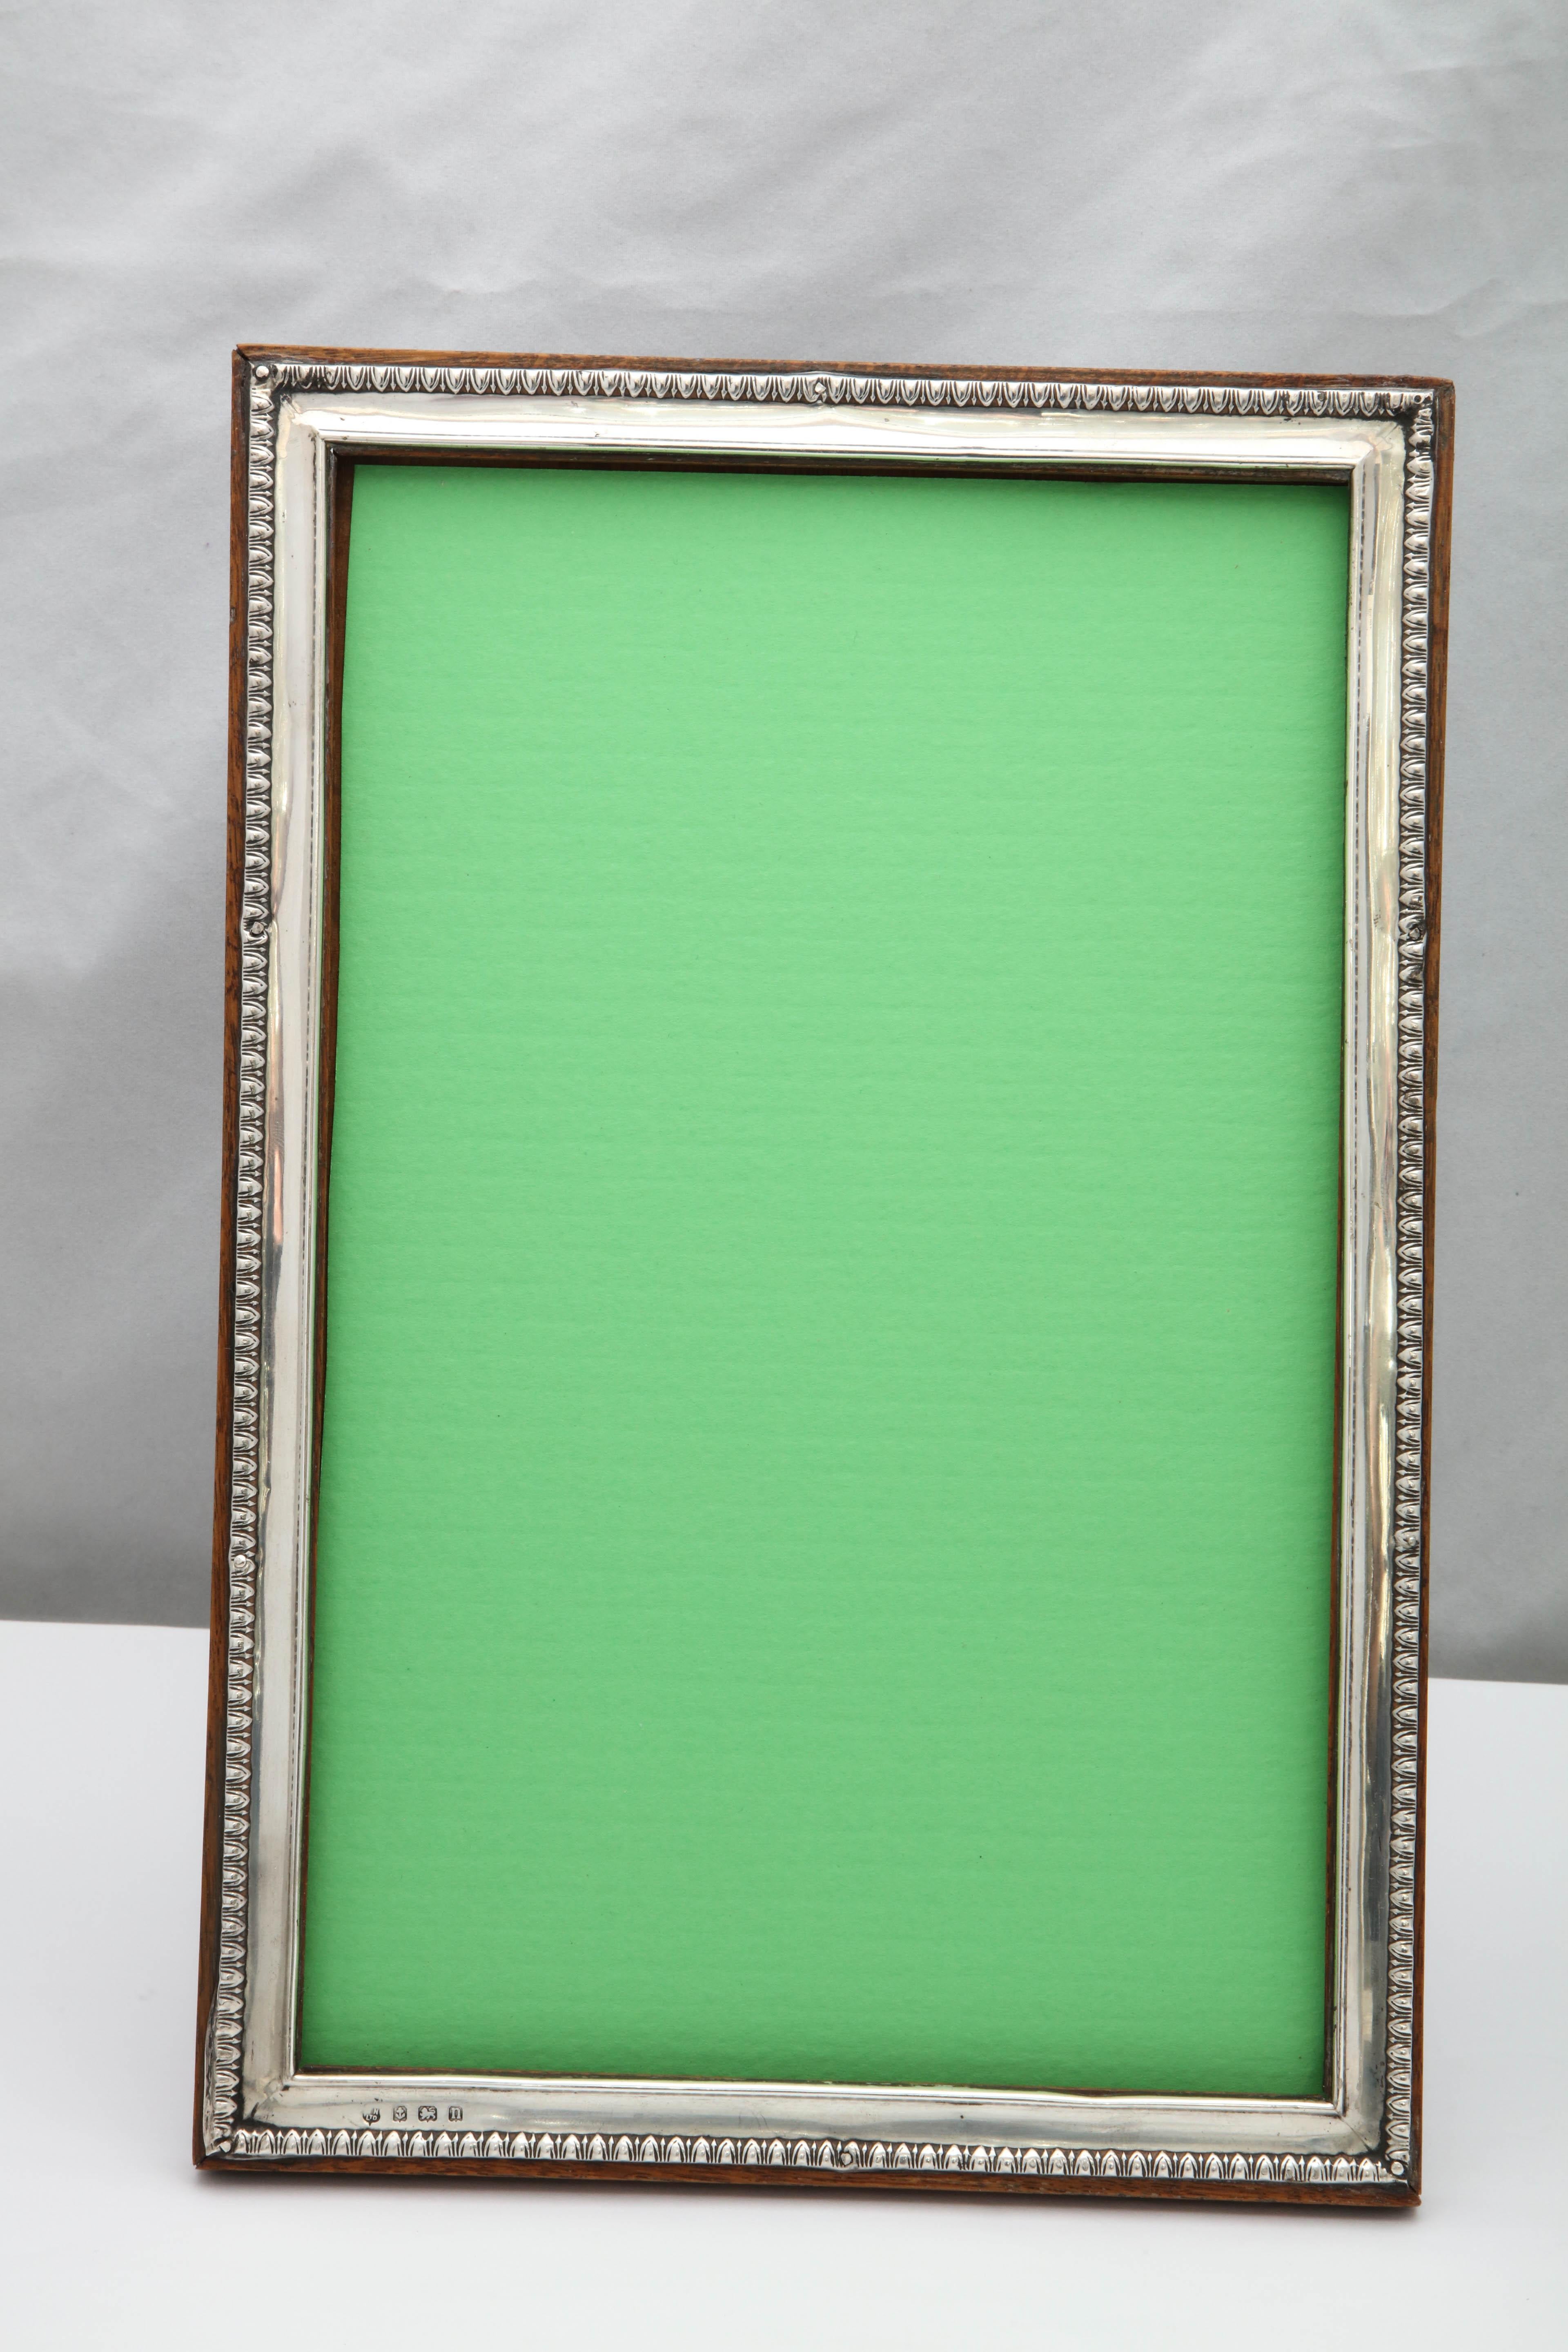 Rare, large, Edwardian, sterling silver picture frame, Birmingham, England, 1912, W. Neale and Sons, Ltd. - makers. Will stand both horizontally and vertically. Egg and dart border. Measures: Stands 12 1/4 inches high x 8 1/4 inches wide (when